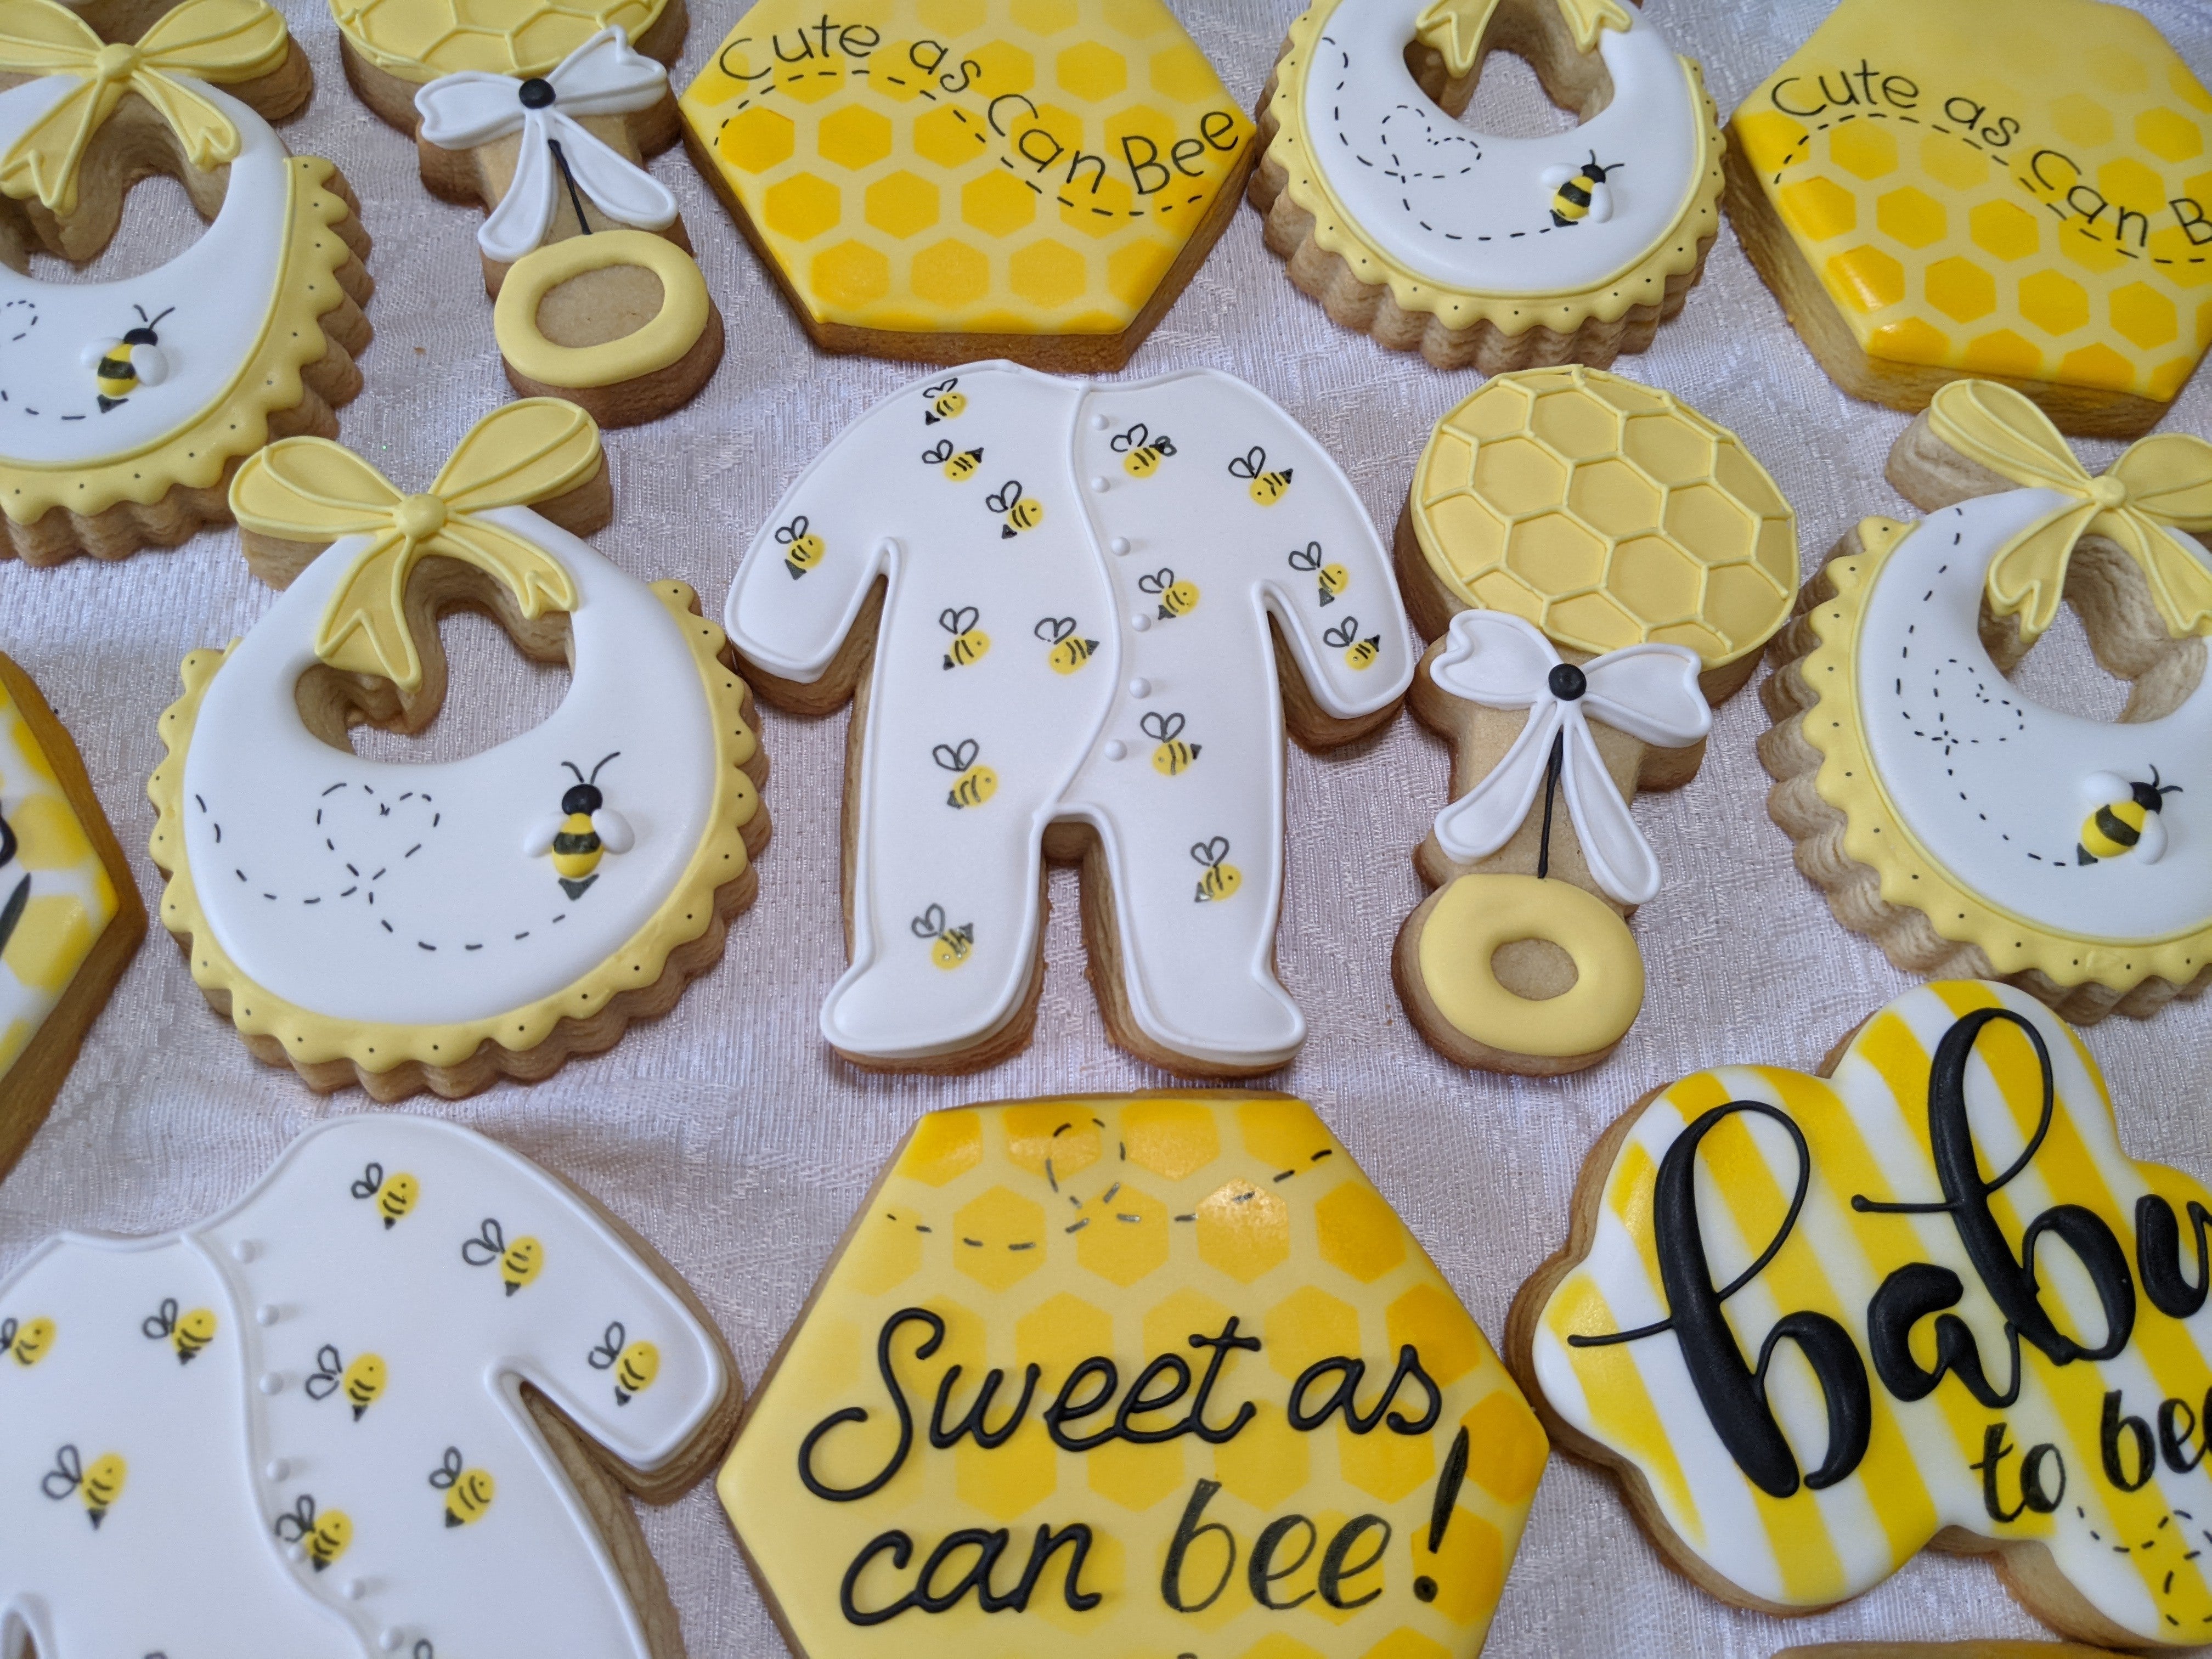 24 Baby to bee baby shower decorated cookies